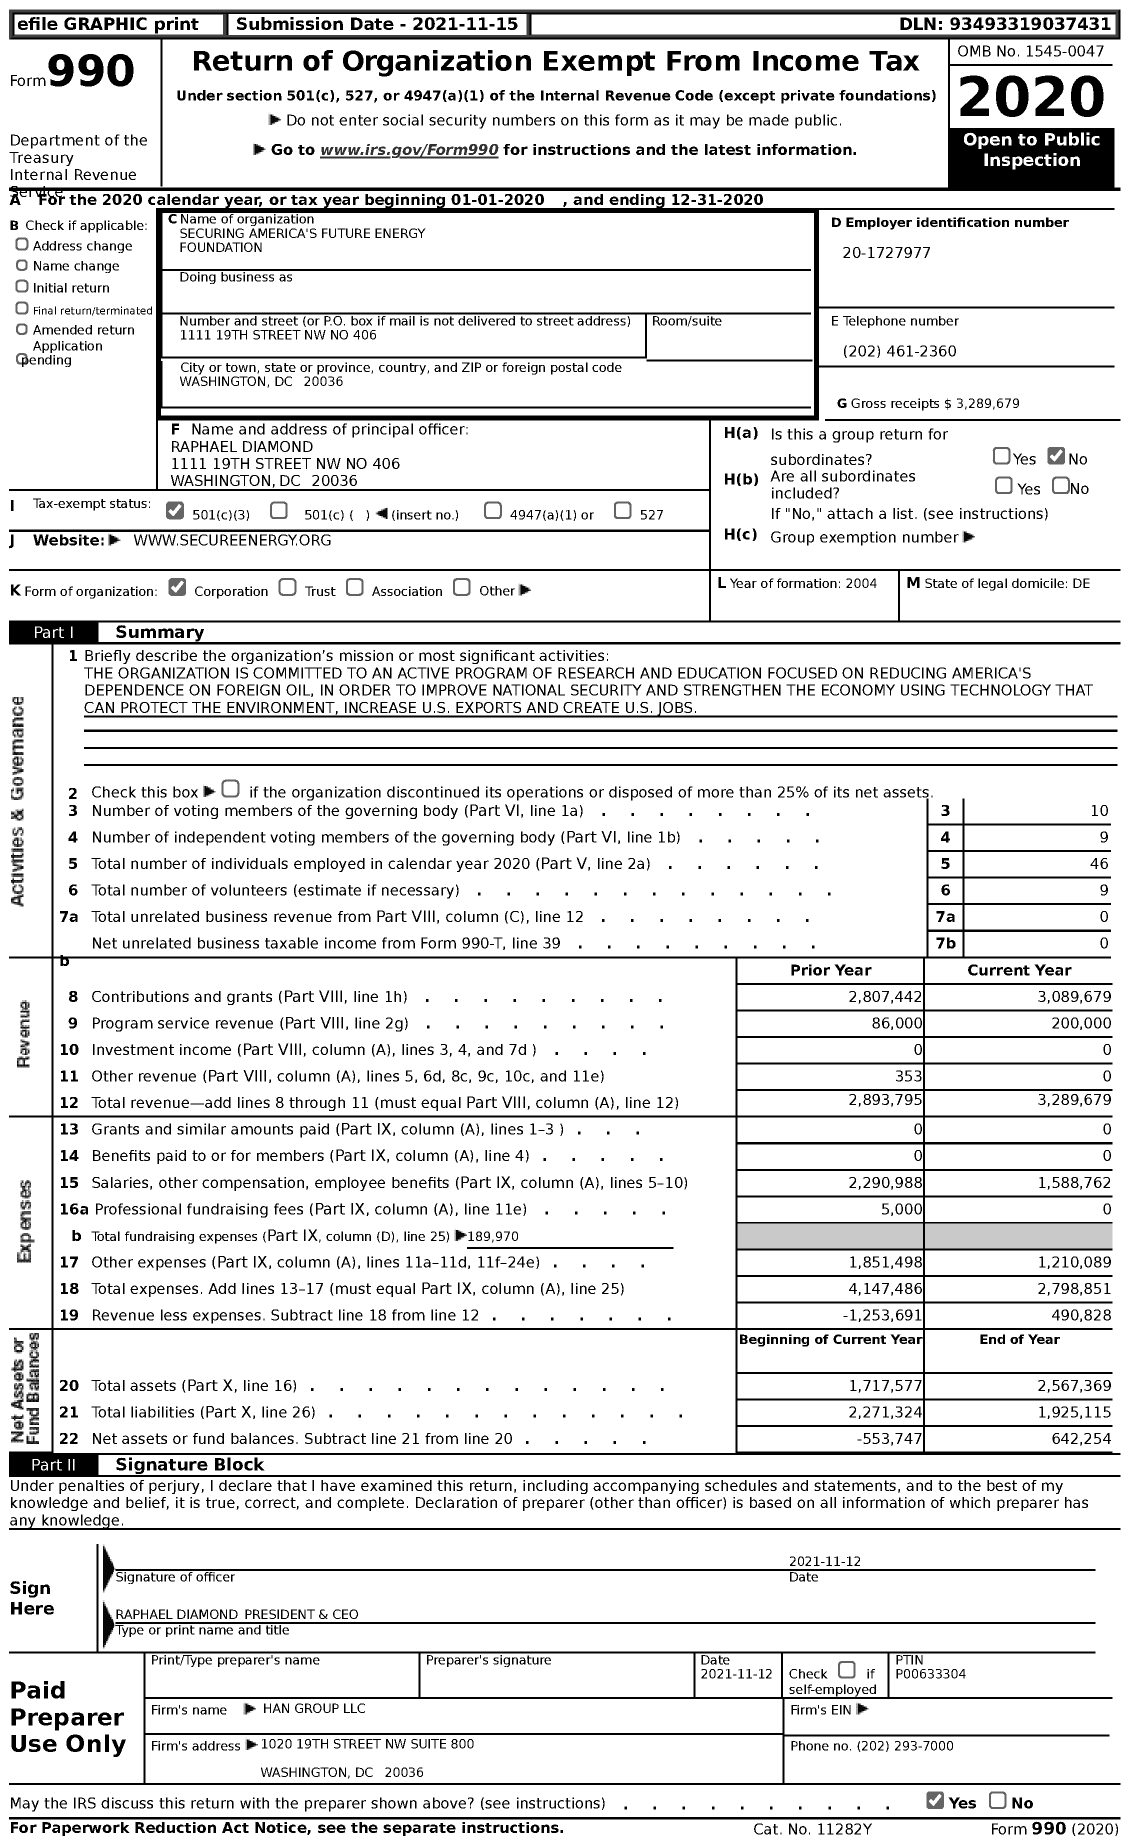 Image of first page of 2020 Form 990 for Securing America's Future Energy Foundation